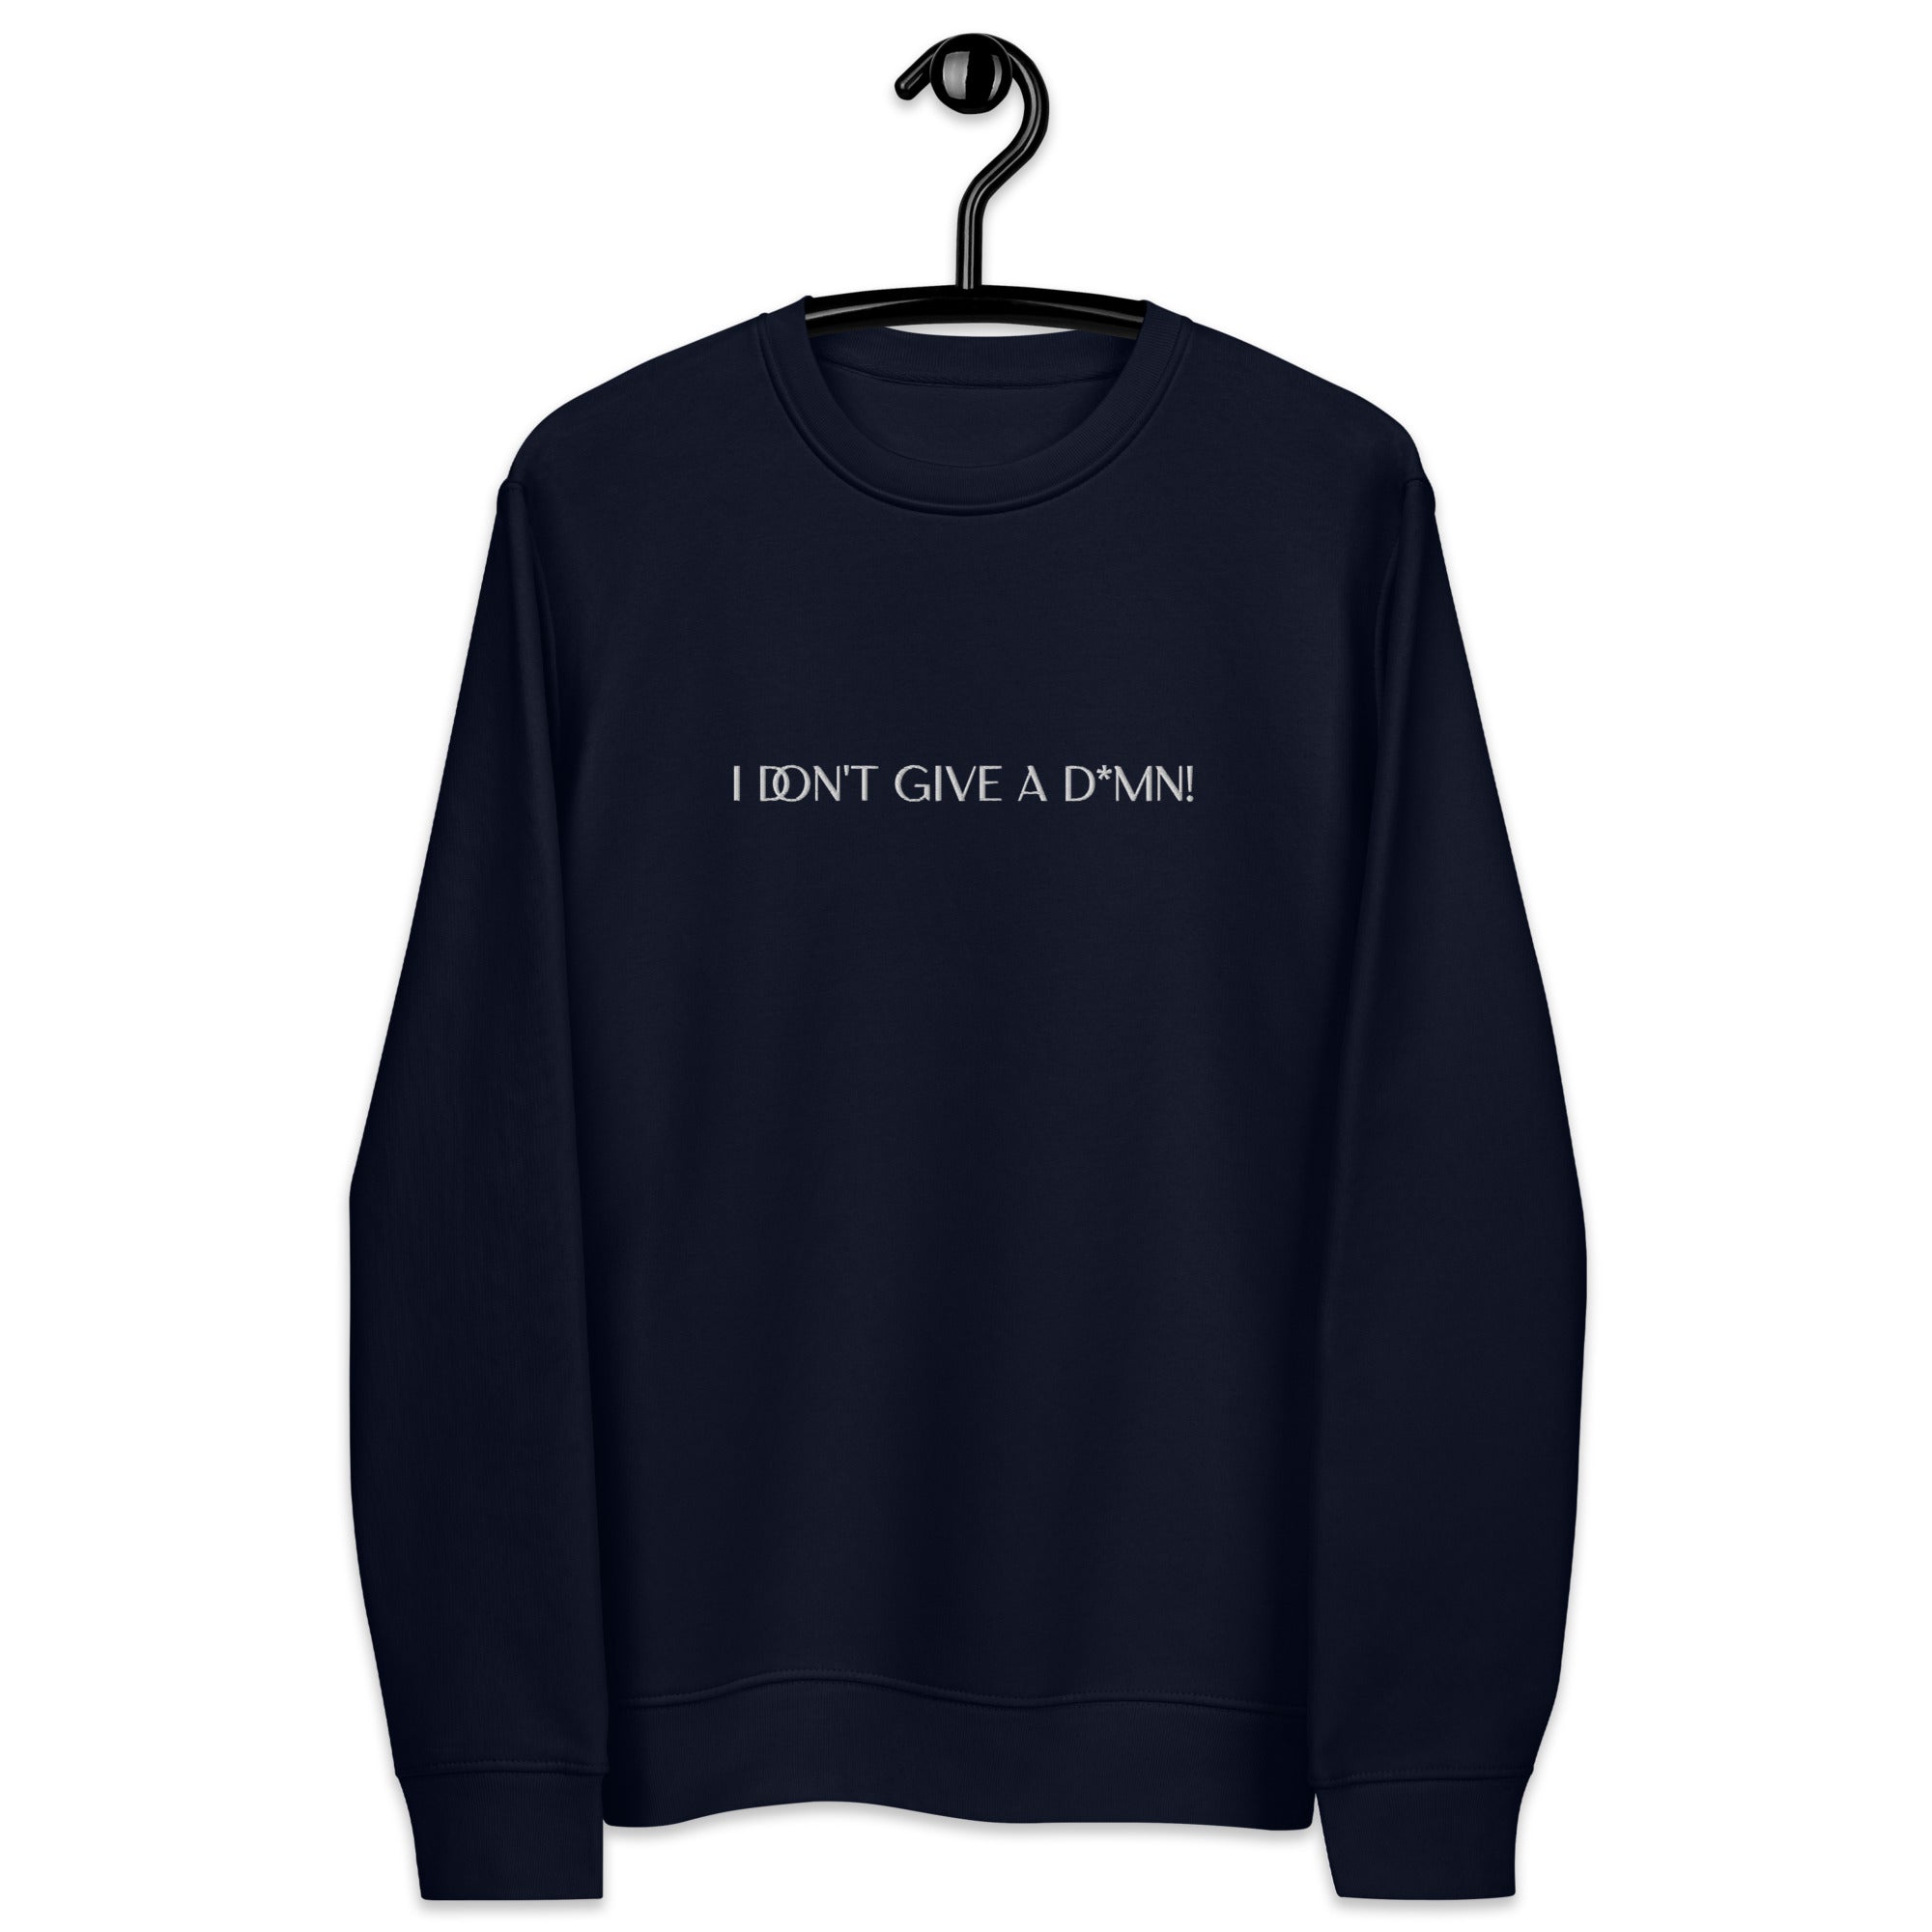 I DON'T GIVE A D*MN WHITE Unisex eco sweatshirt